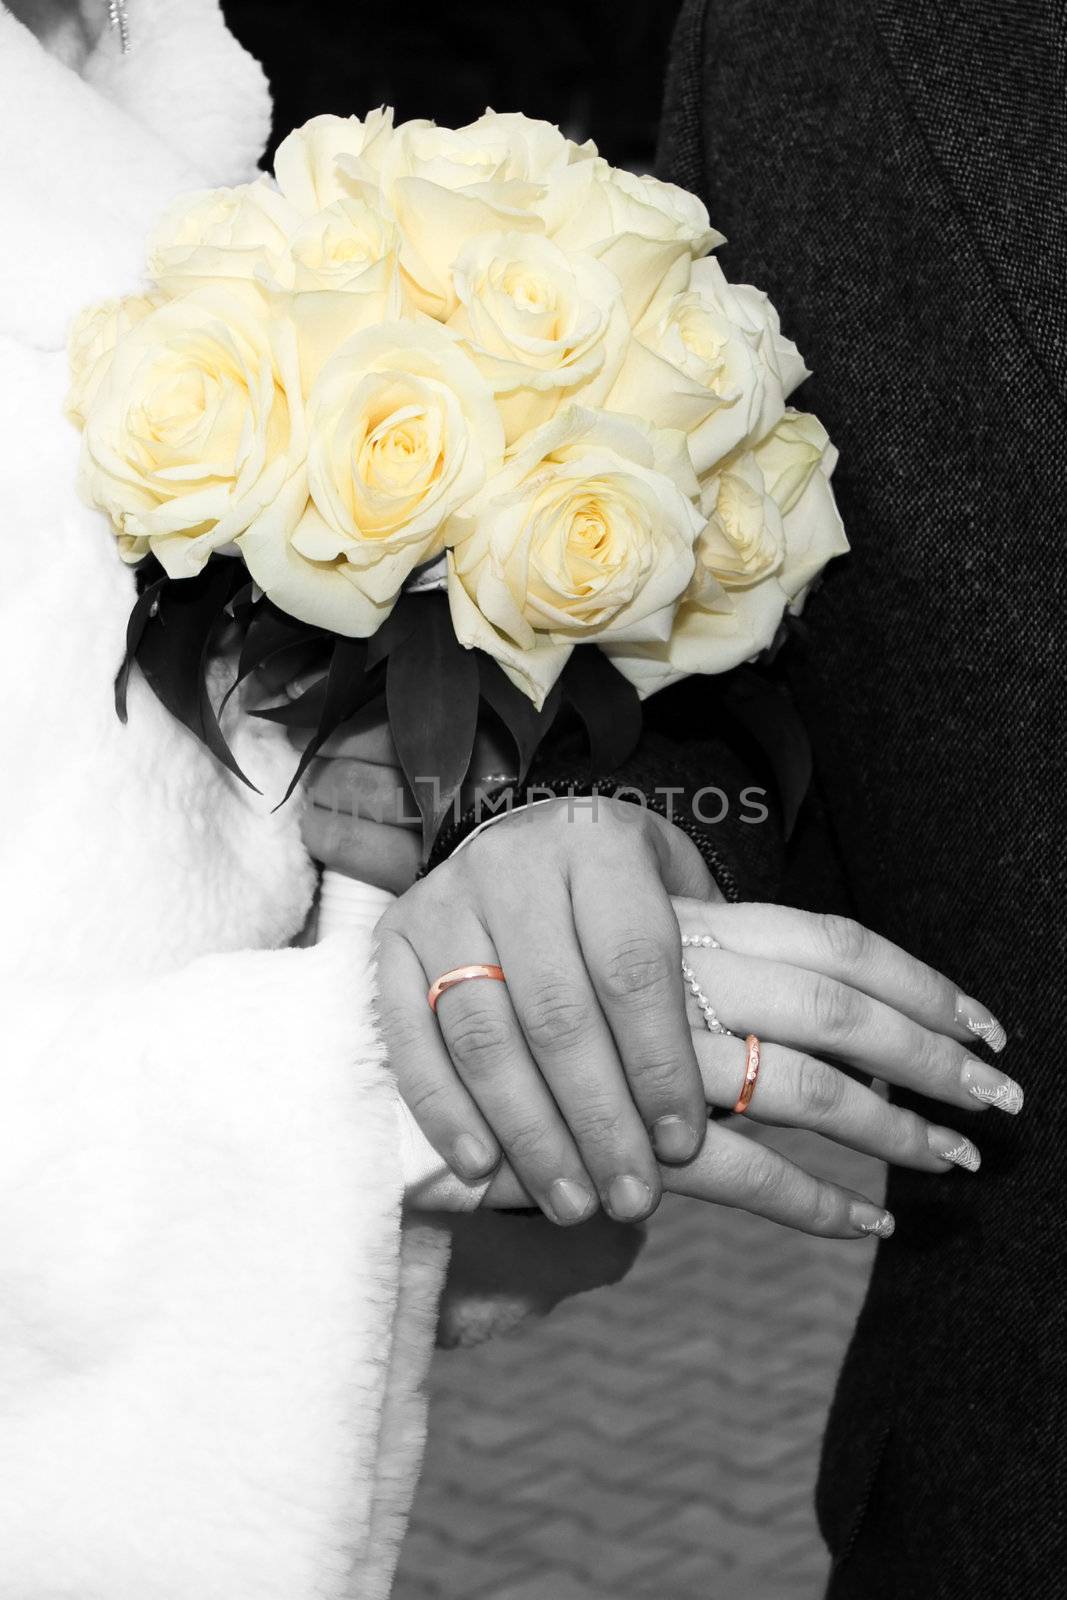 Wedding bouquet and groom's and bride's hands with wedding rings. Black and white photo with color accent